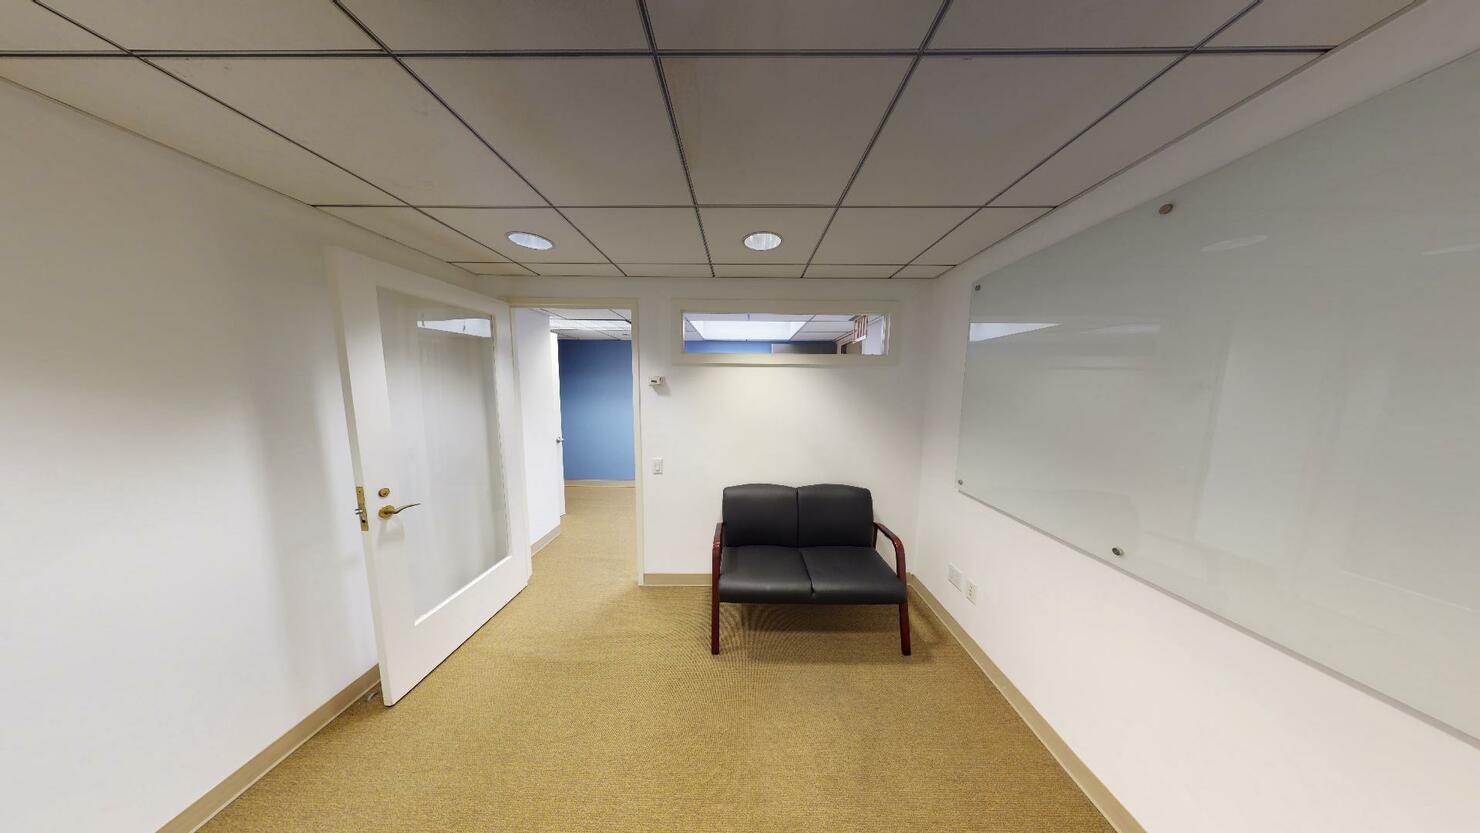 483 Tenth Avenue Office Space - Waiting Area